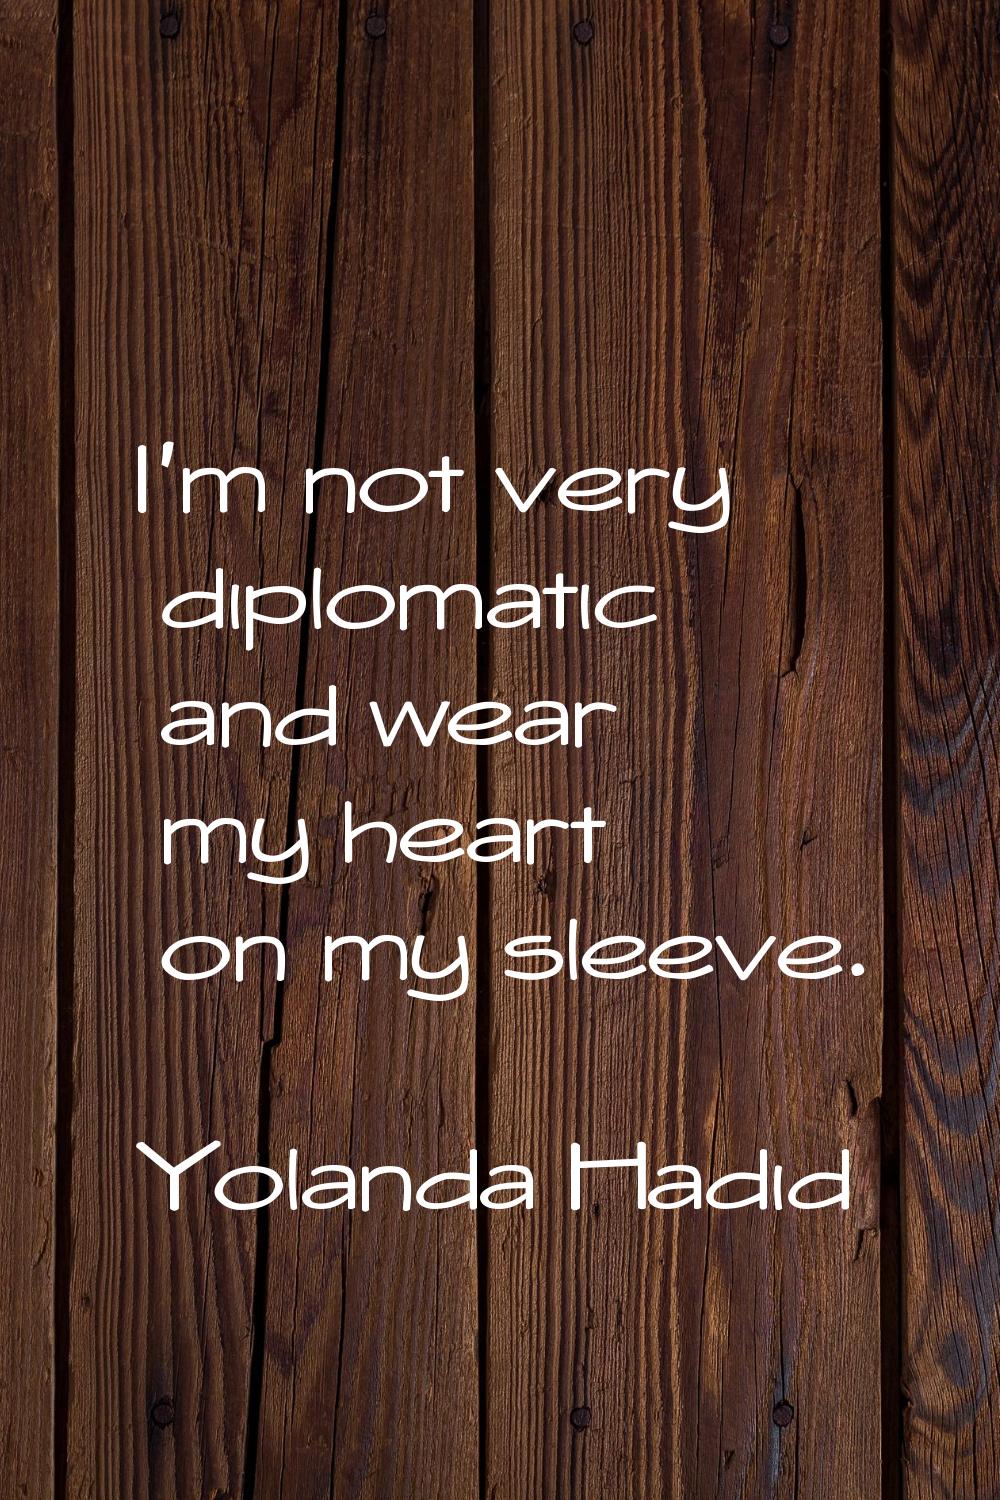 I'm not very diplomatic and wear my heart on my sleeve.